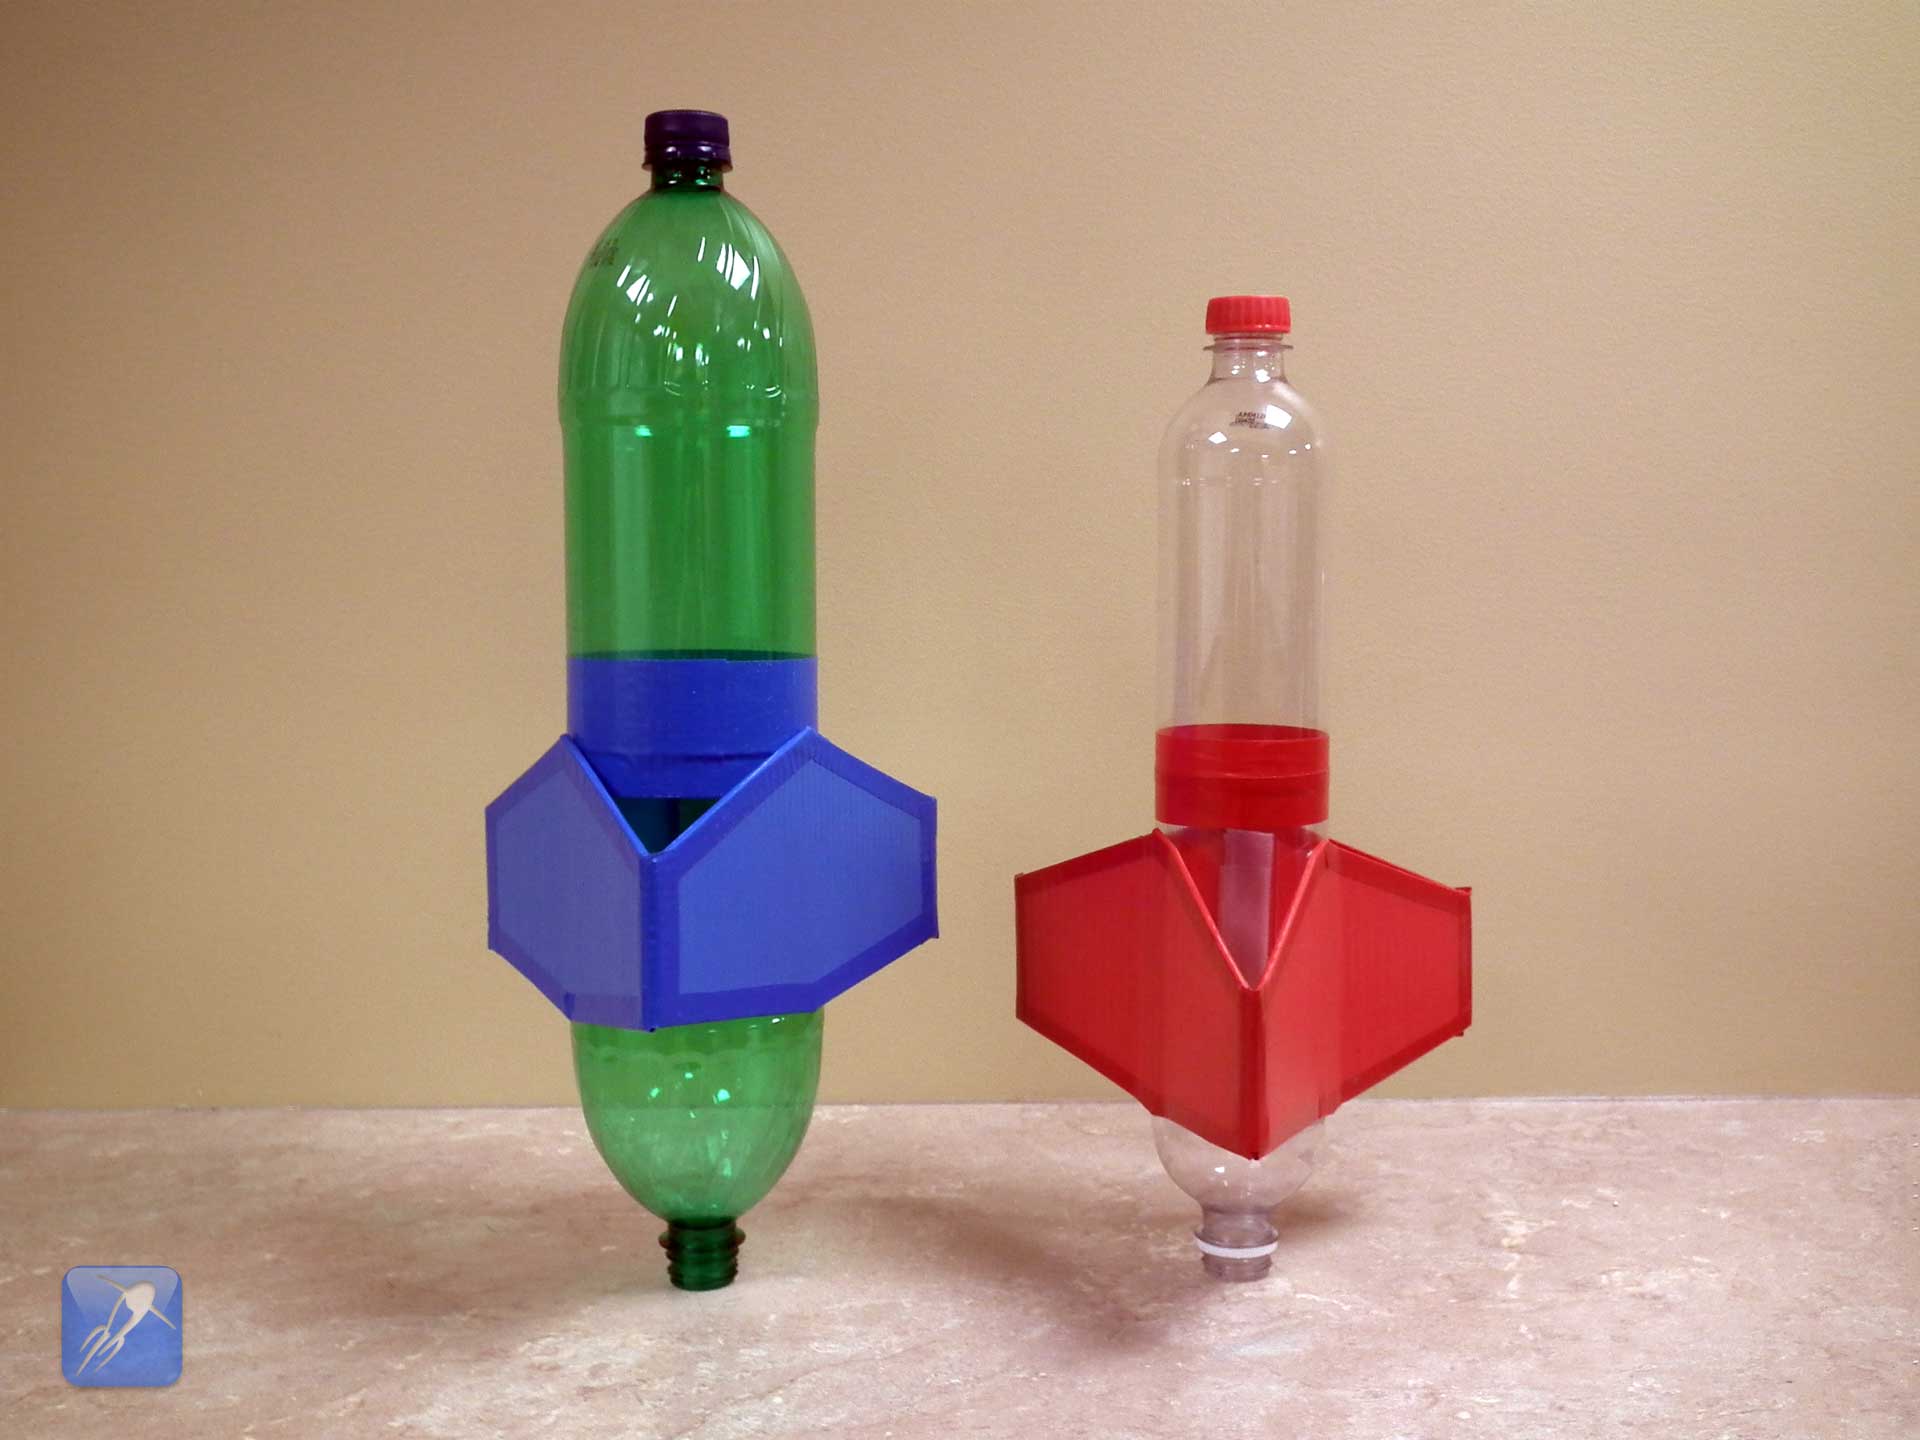 U.S. Water Rockets - Water Rocket Designs, Construction, and